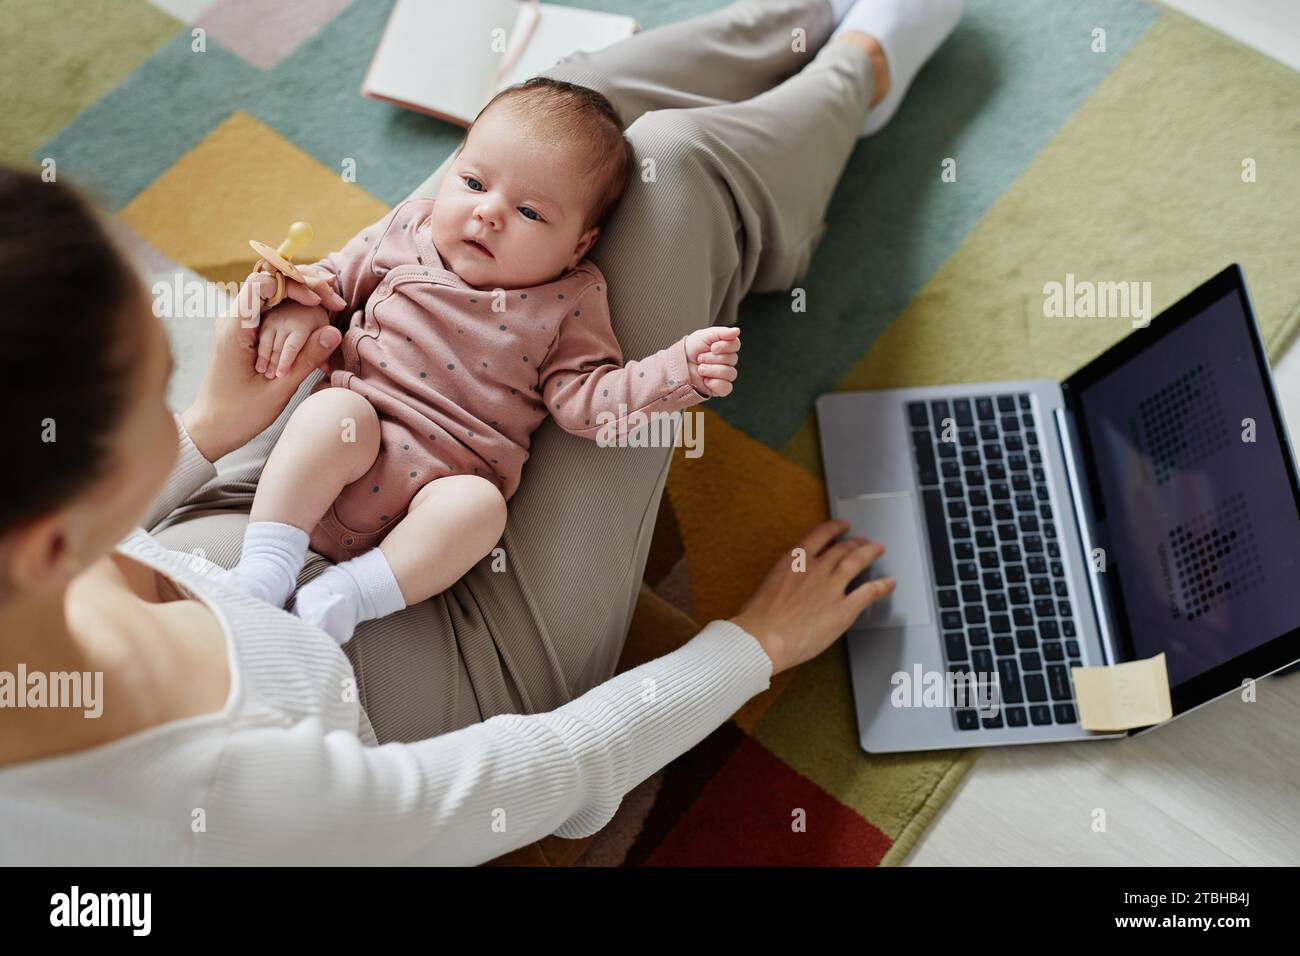 Curious Adorable Newborn Looking at Working Mom Stock Photo